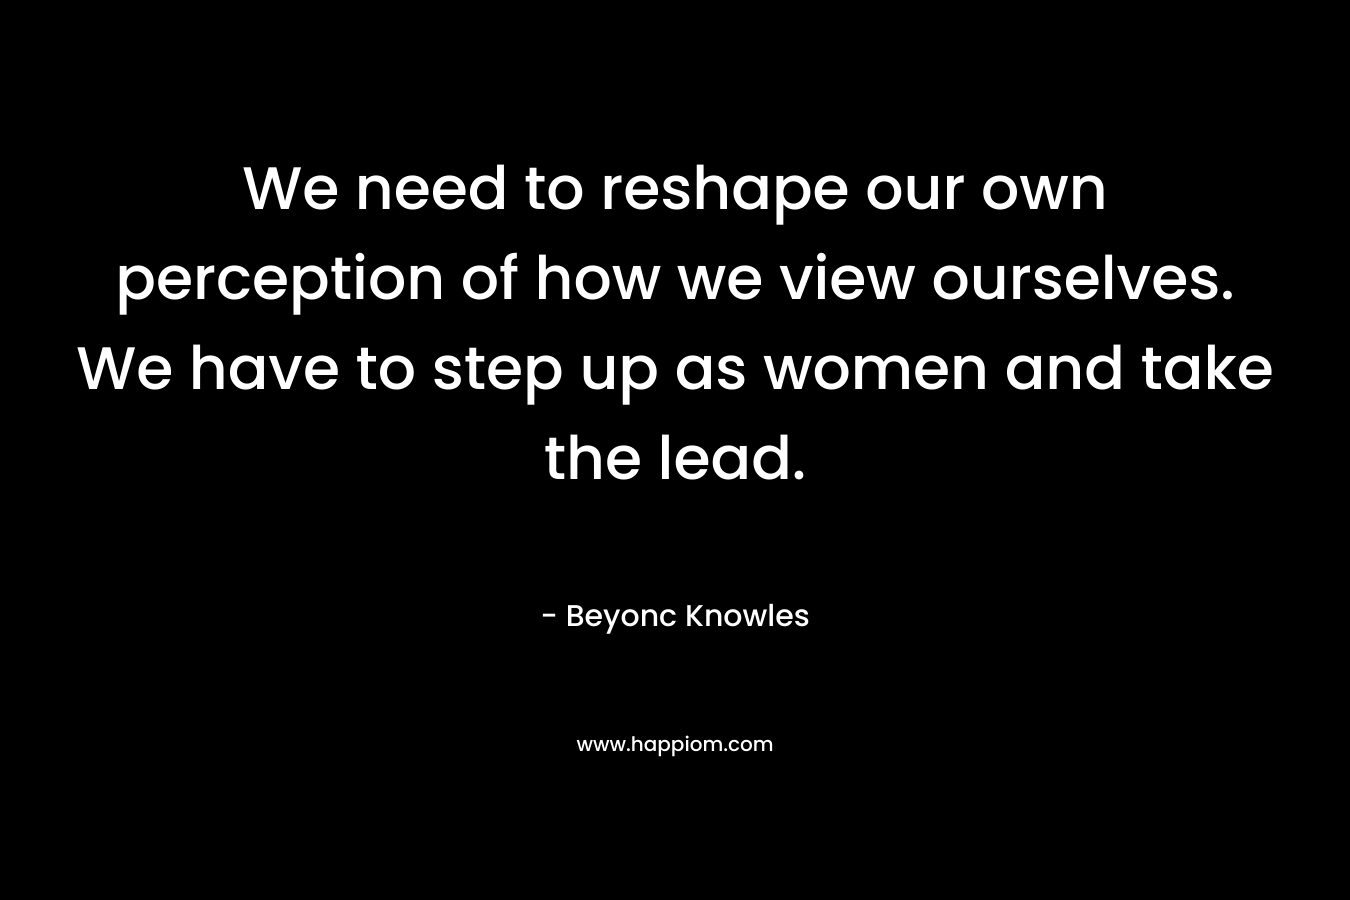 We need to reshape our own perception of how we view ourselves. We have to step up as women and take the lead. – Beyonc Knowles